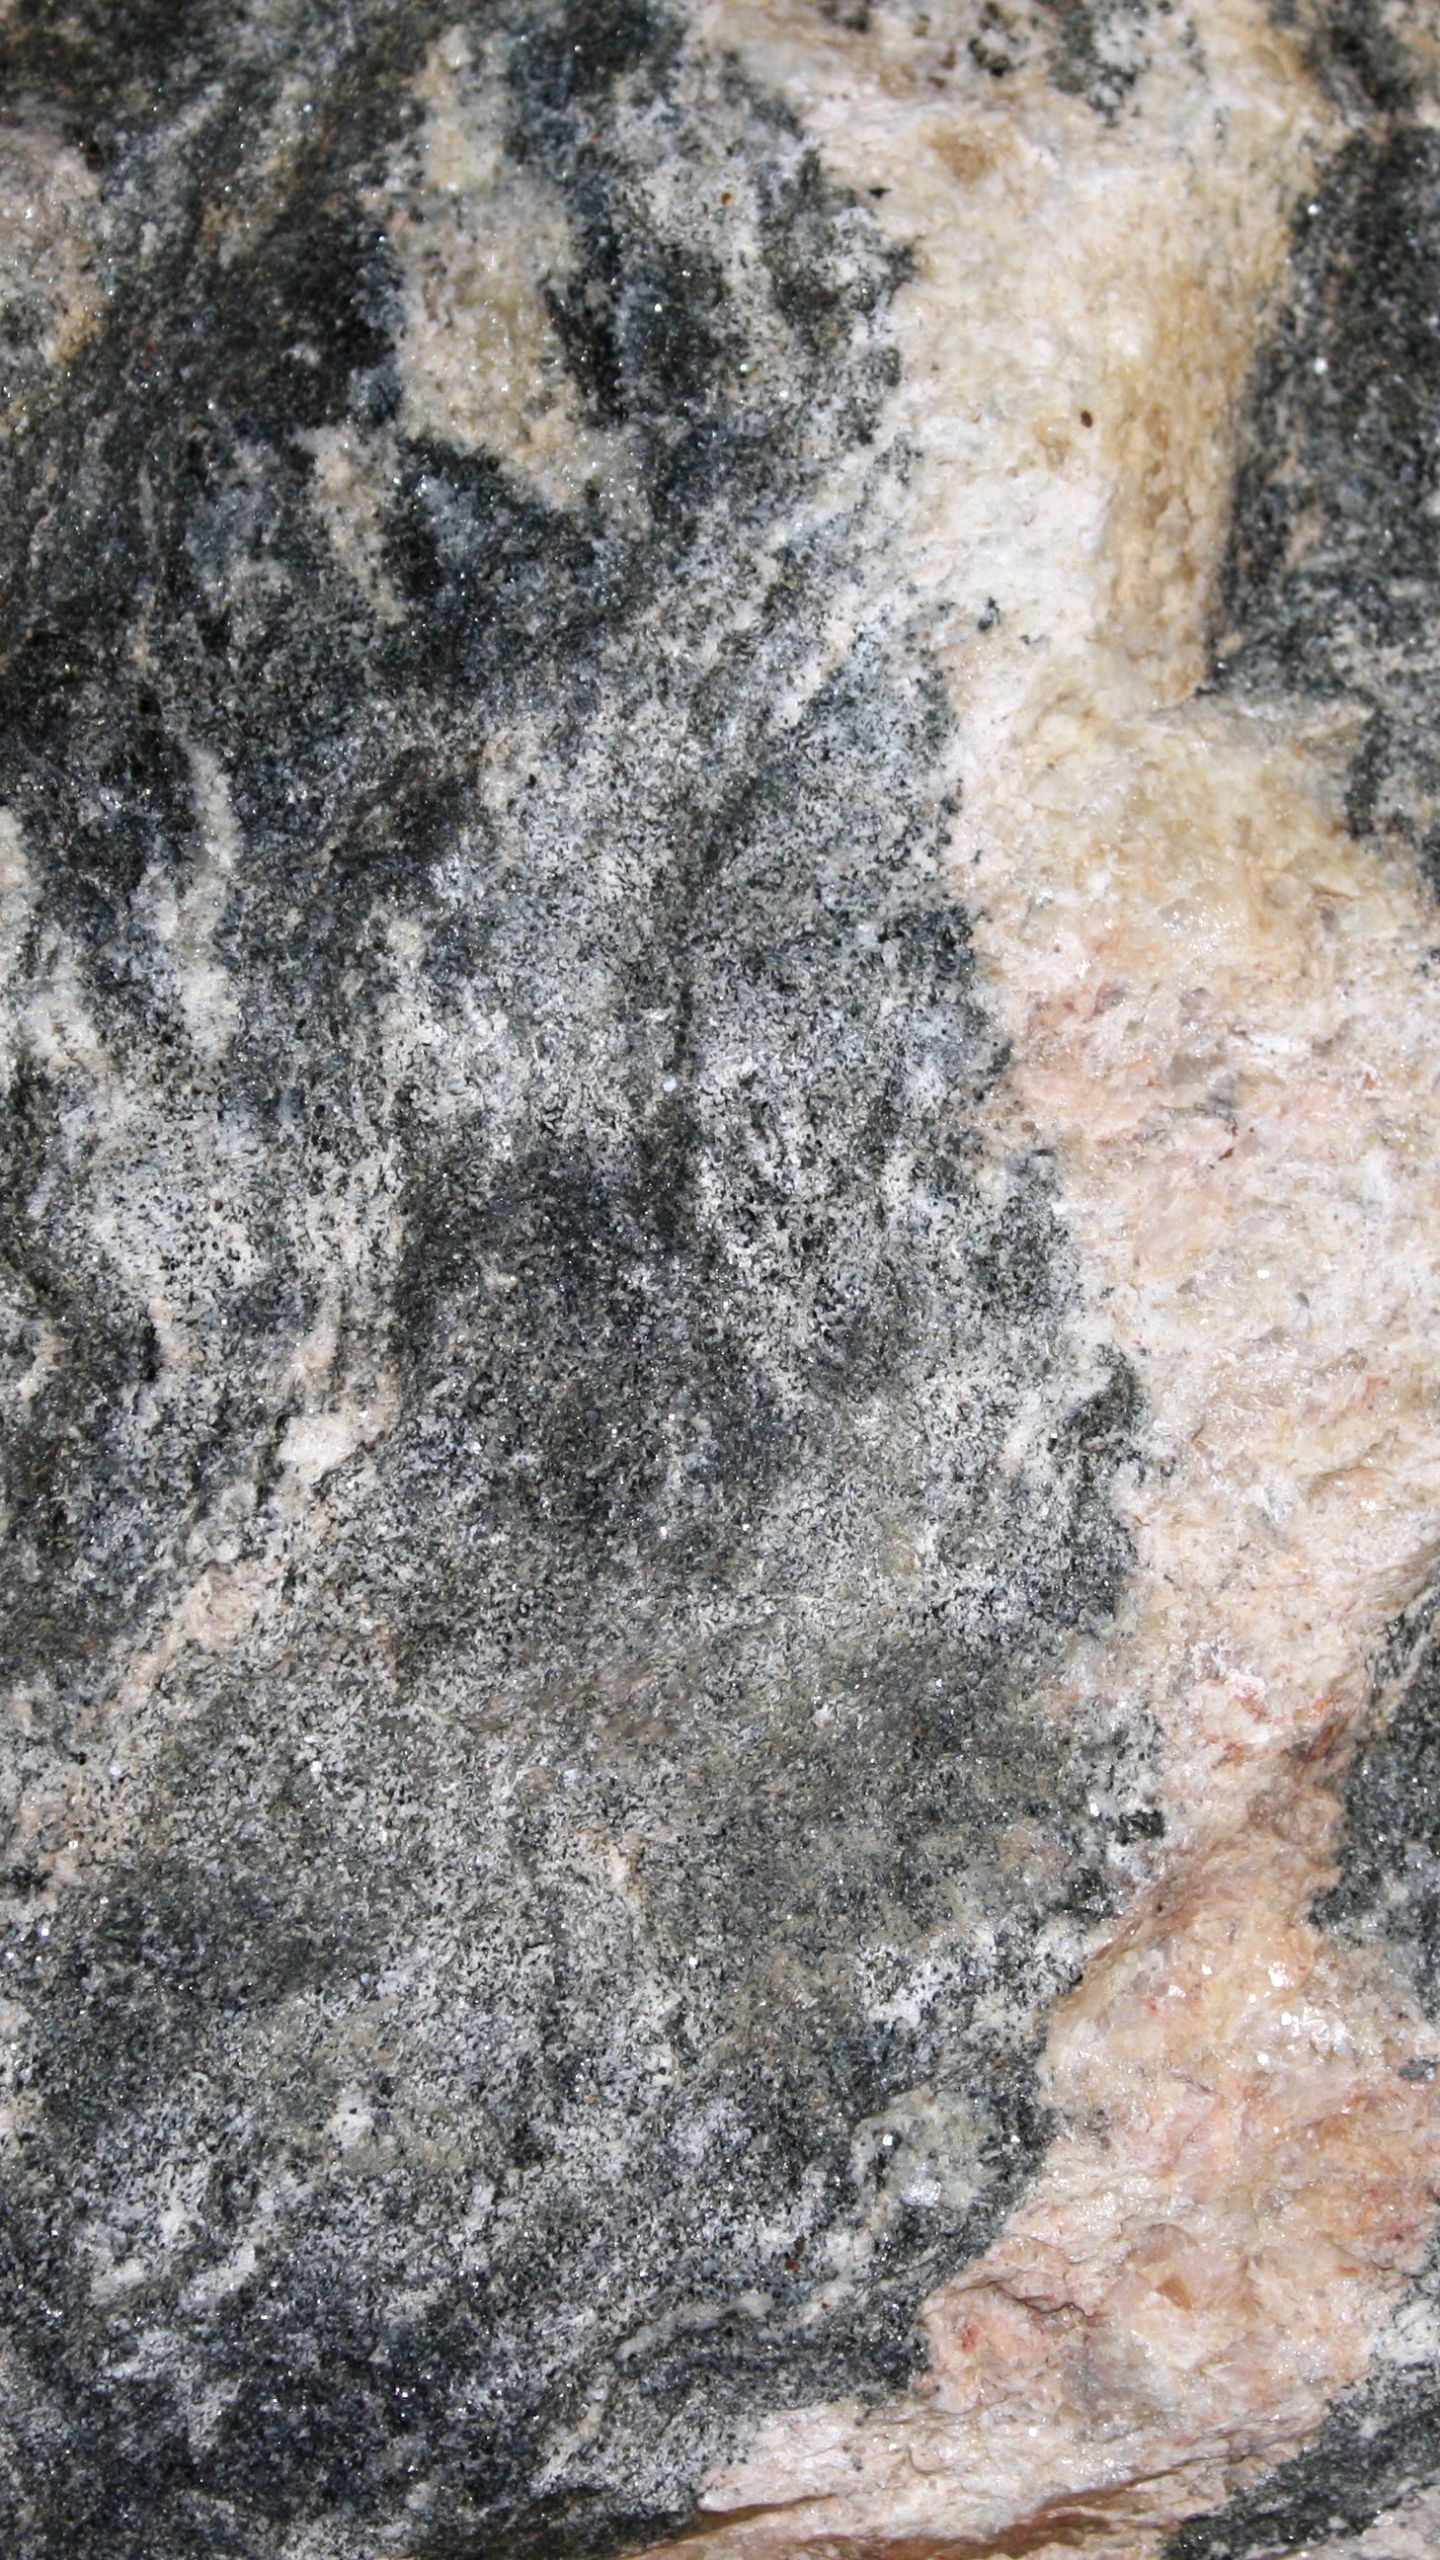 Free download Mica Schist Metamorphic Rock Texture High Resolution Photo [3888x2592] for your Desktop, Mobile & Tablet. Explore Mica Stone Wallpaper. Mica Stone Wallpaper, Mica Wallpaper, White Mica Wallpaper